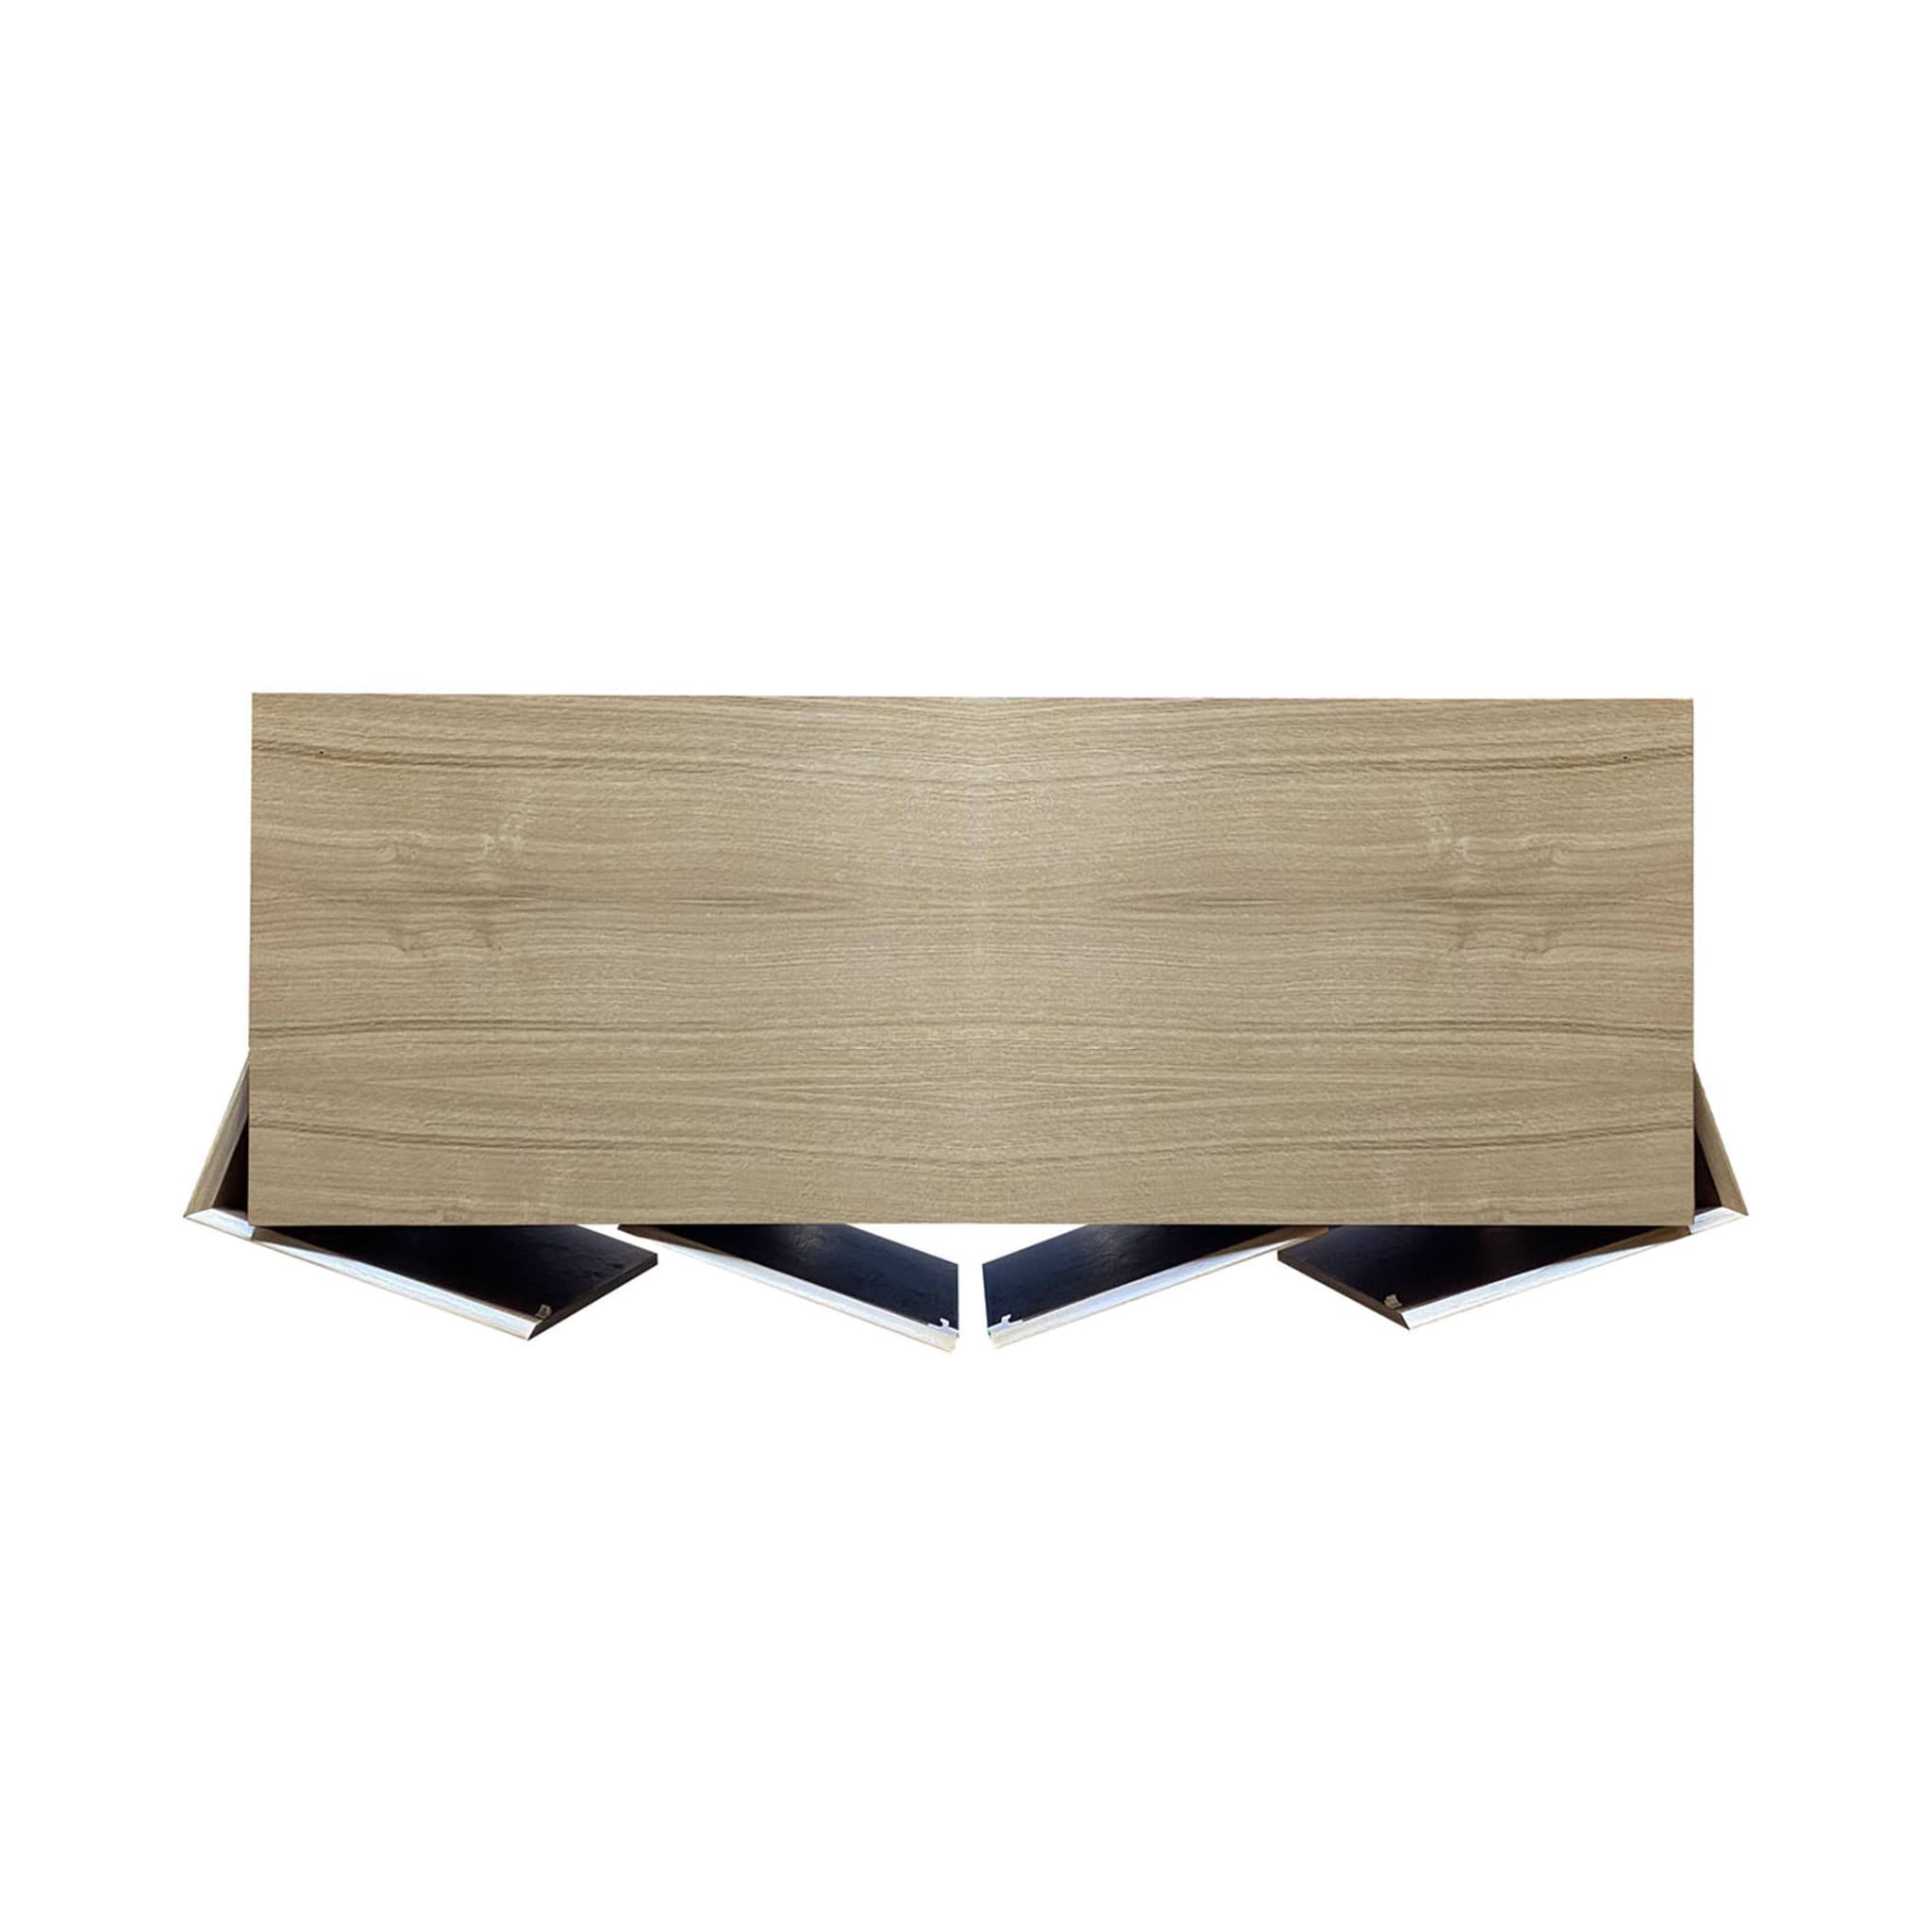 Md1 4-Door Striped Sideboard by Meccani Studio - Alternative view 3